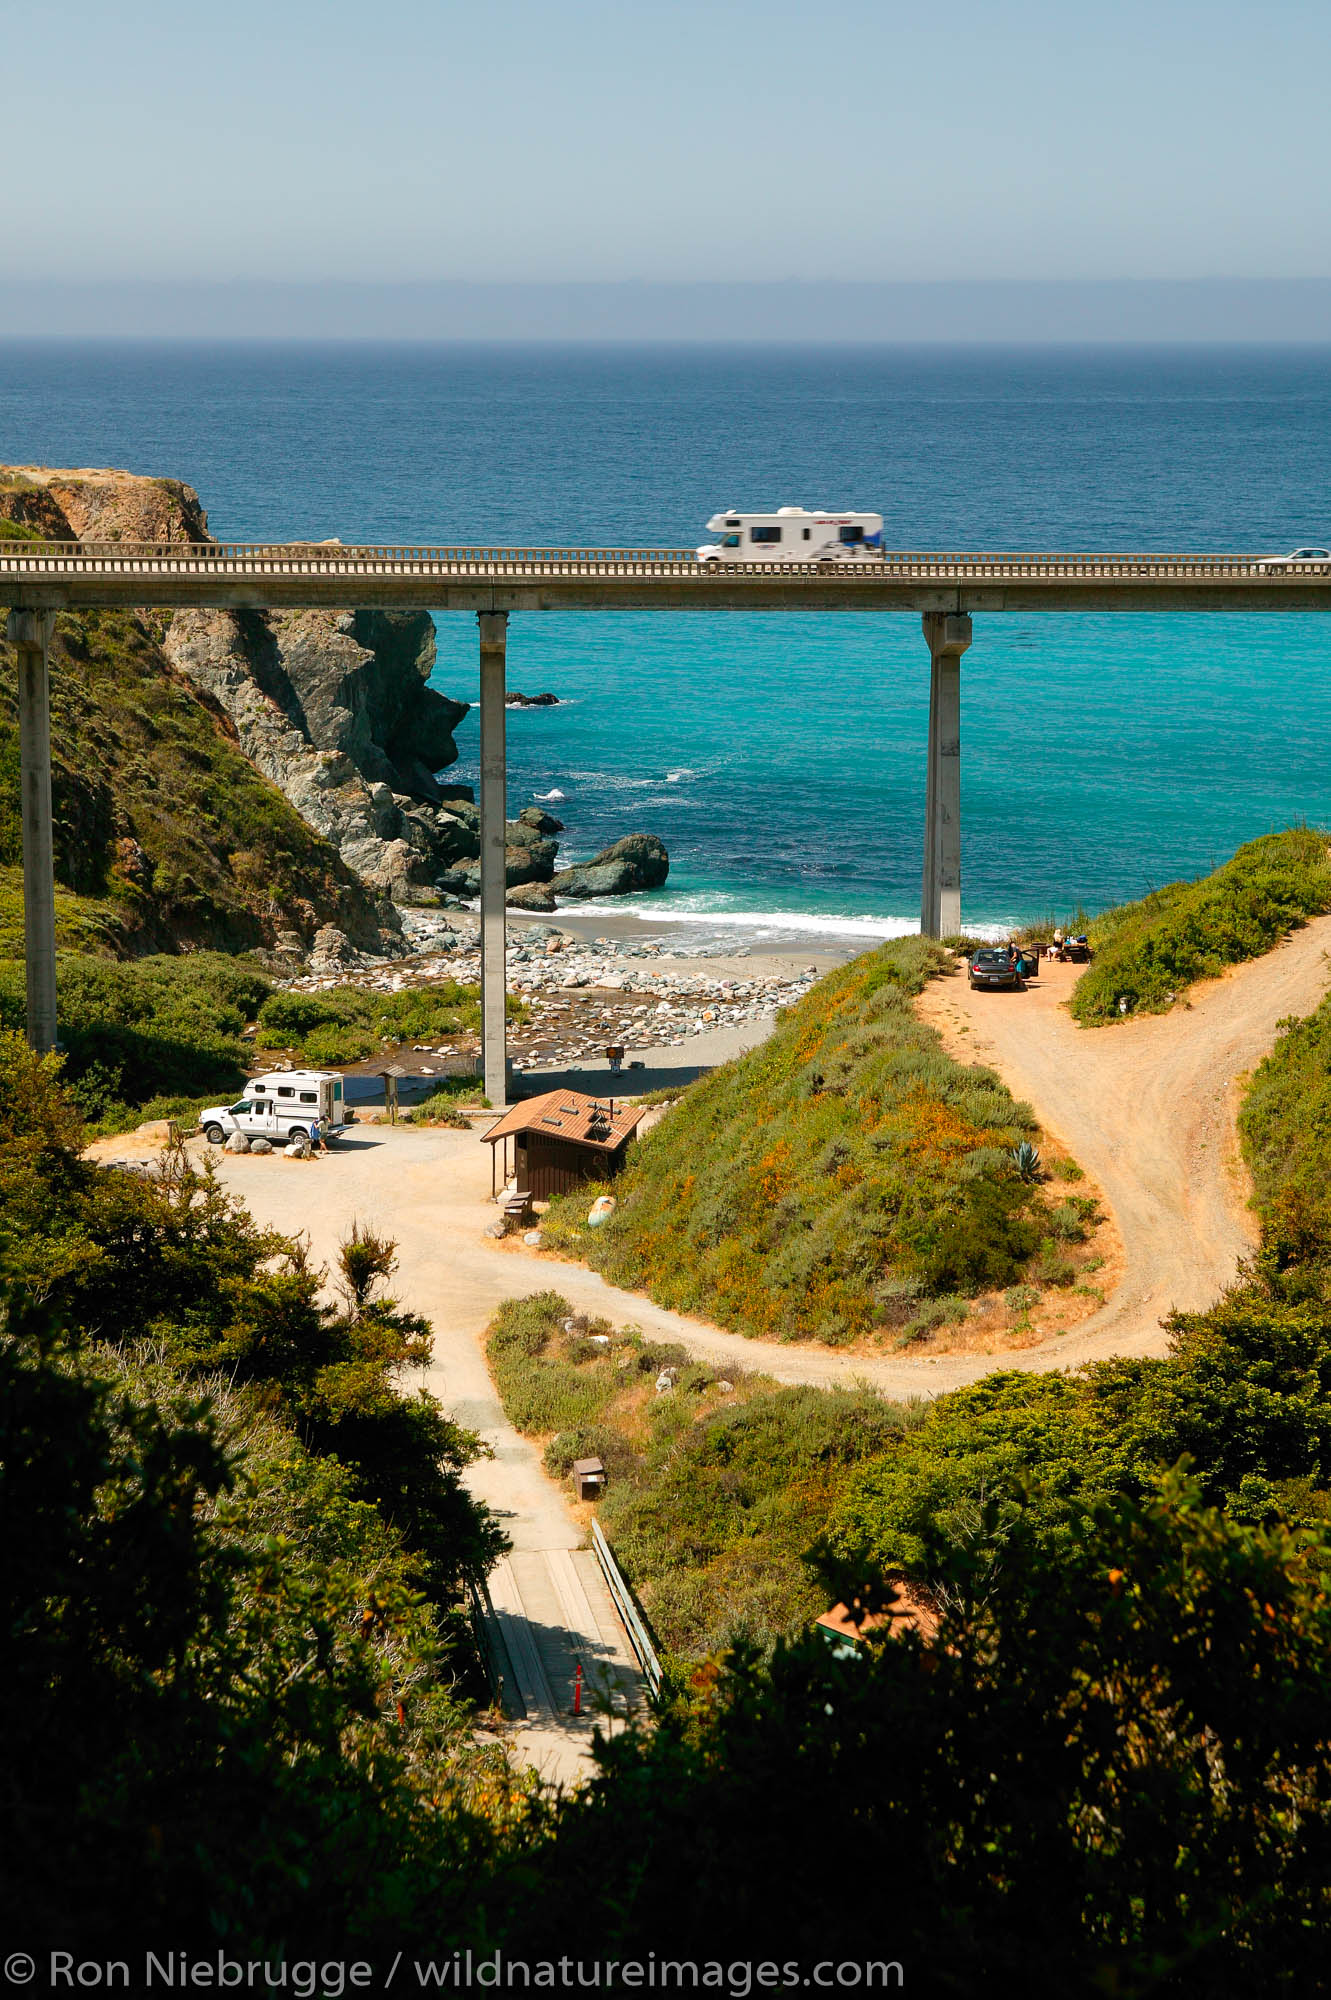 The campground and Highway 1 at Limekiln State Park, Central Coast, Big Sur, California.